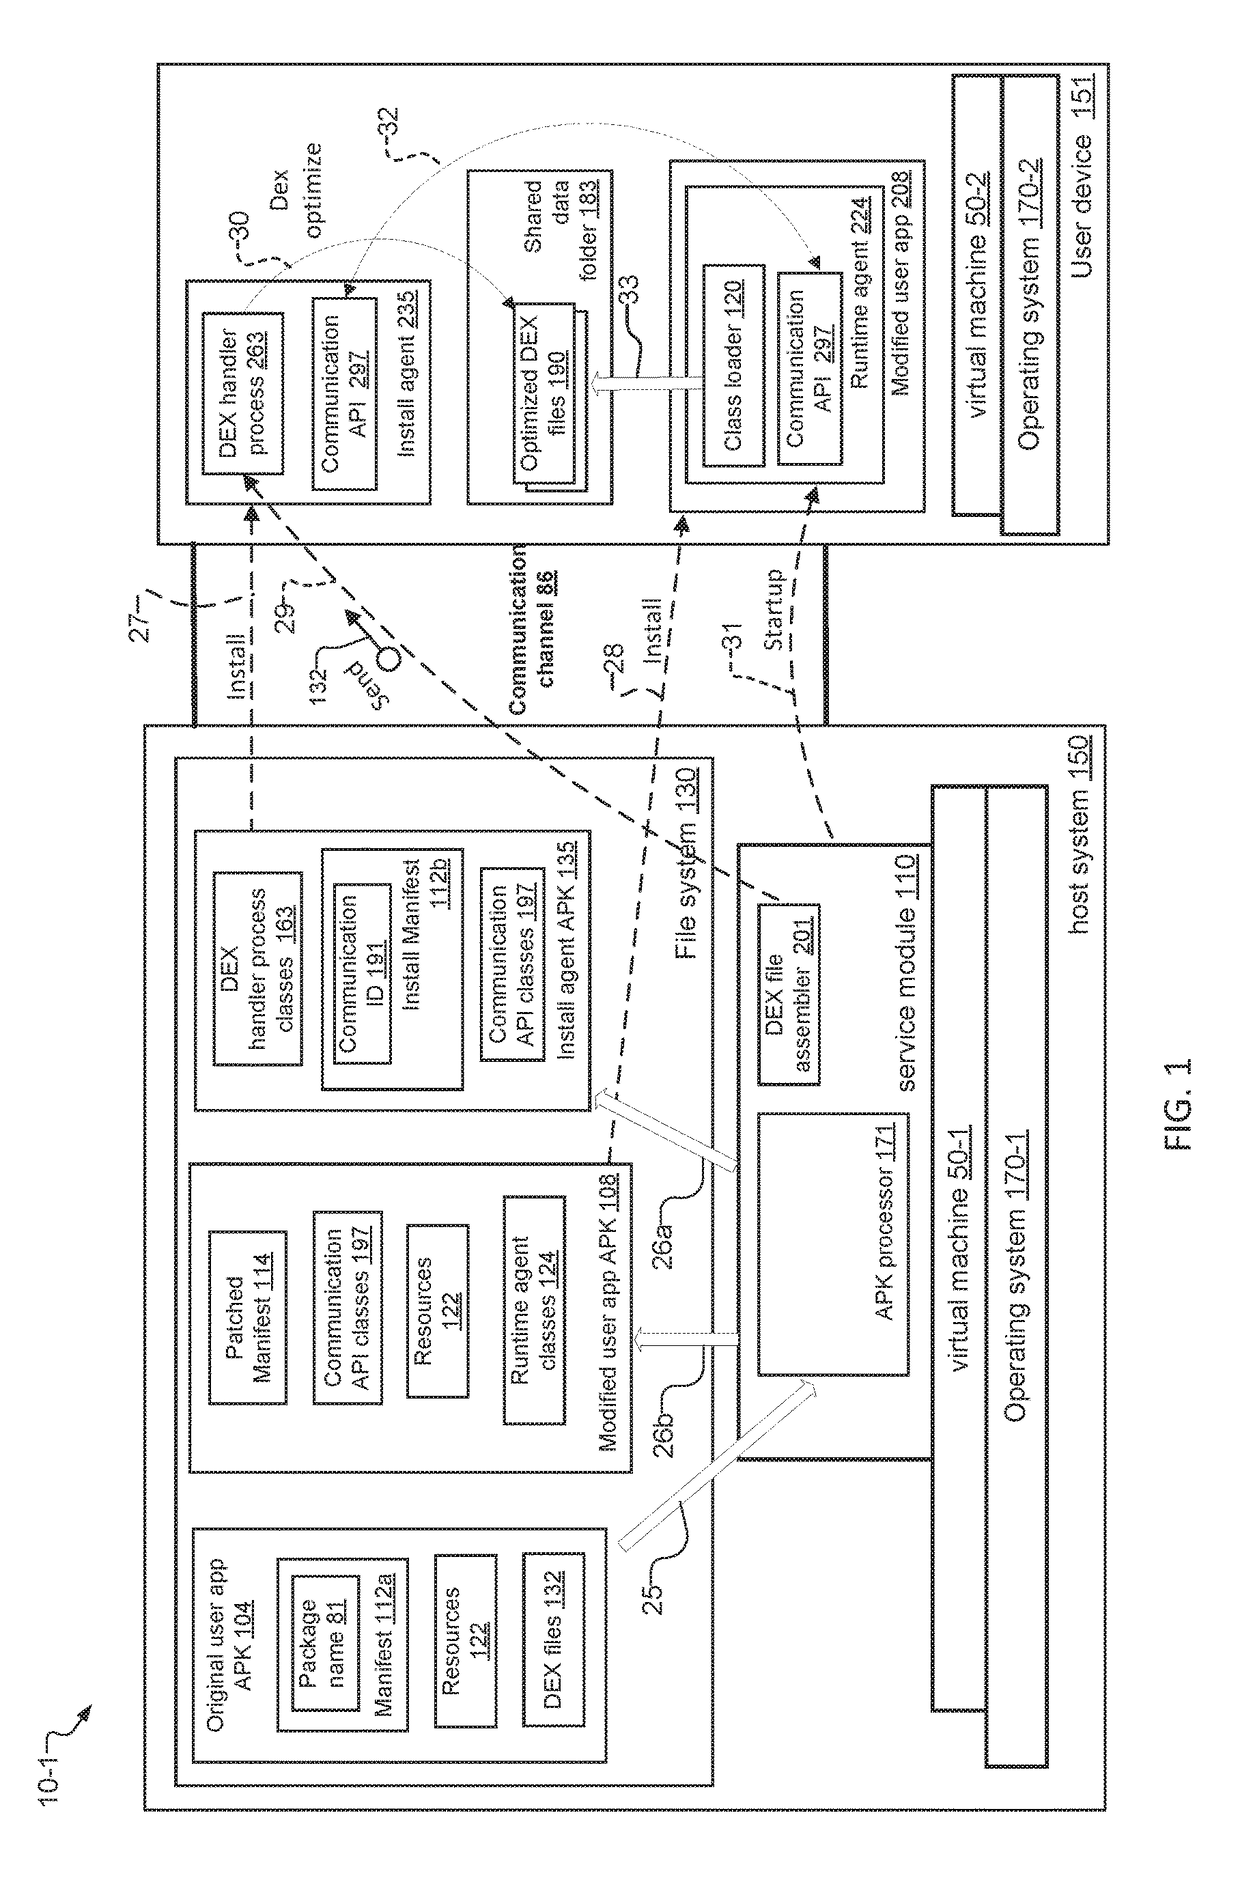 System and Method for Fast Initial and Incremental Deployment of Apps